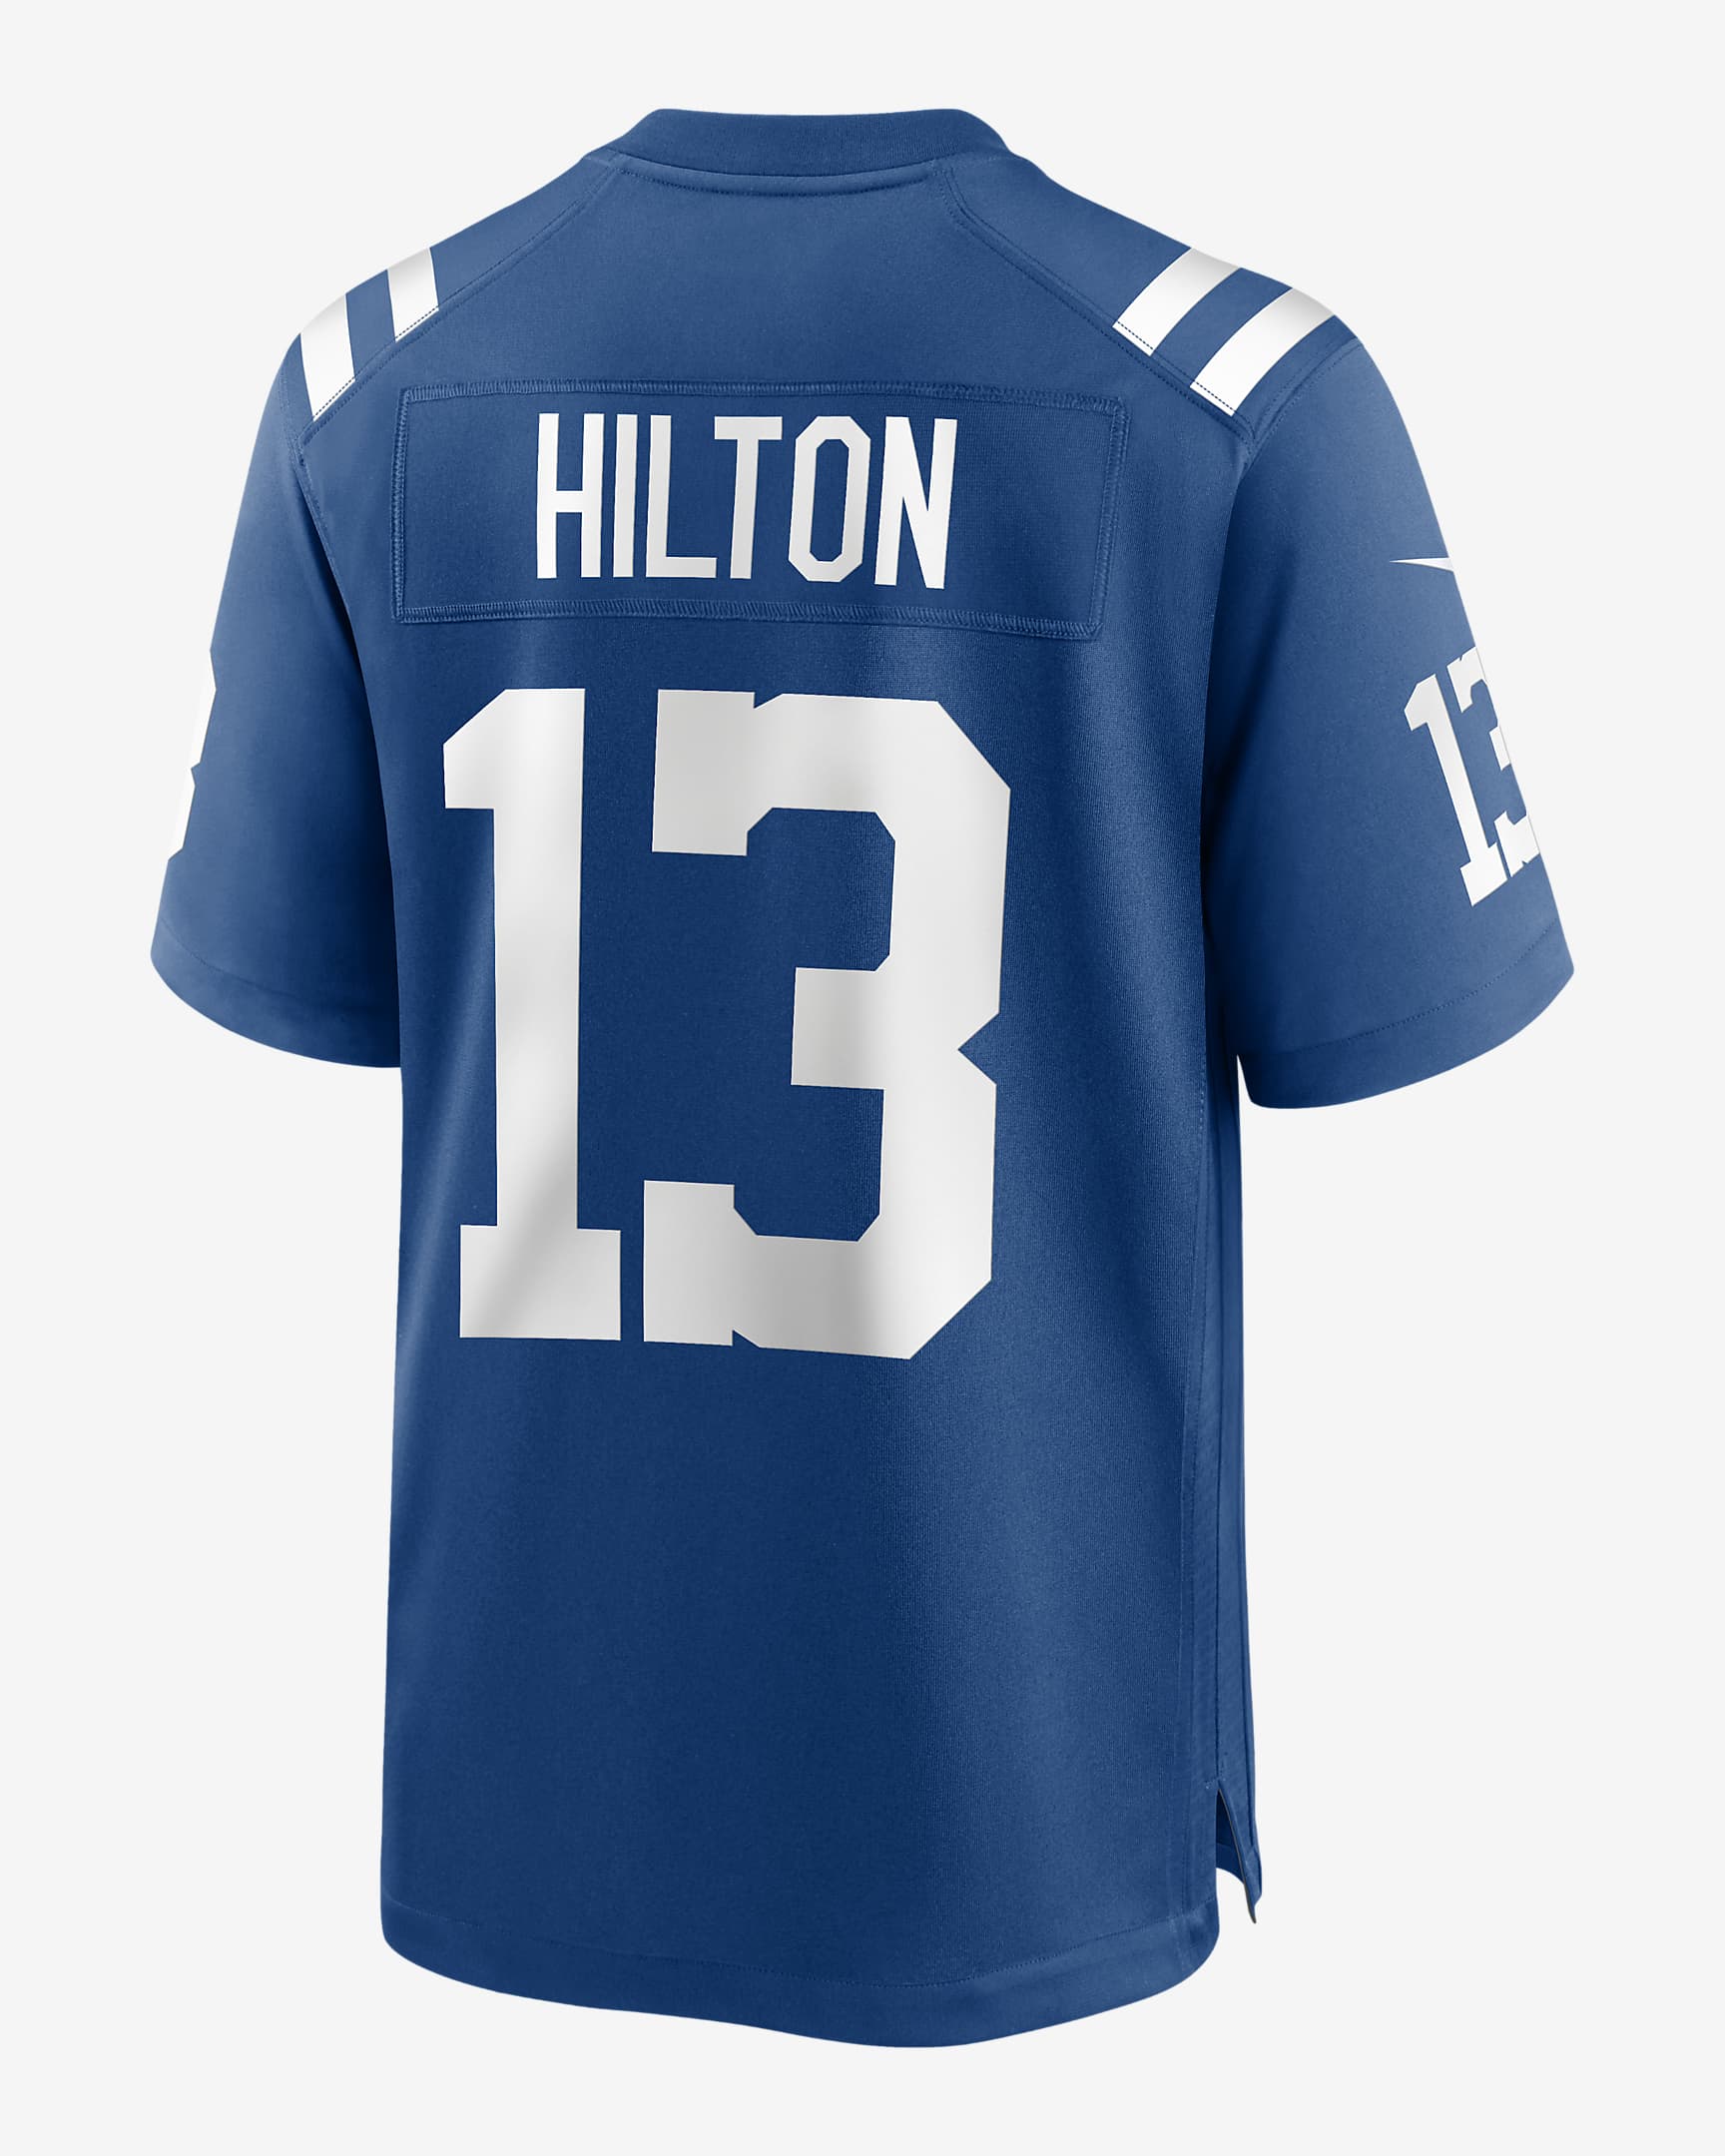 NFL Indianapolis Colts (T.Y. Hilton) Men's Game Football Jersey. Nike.com